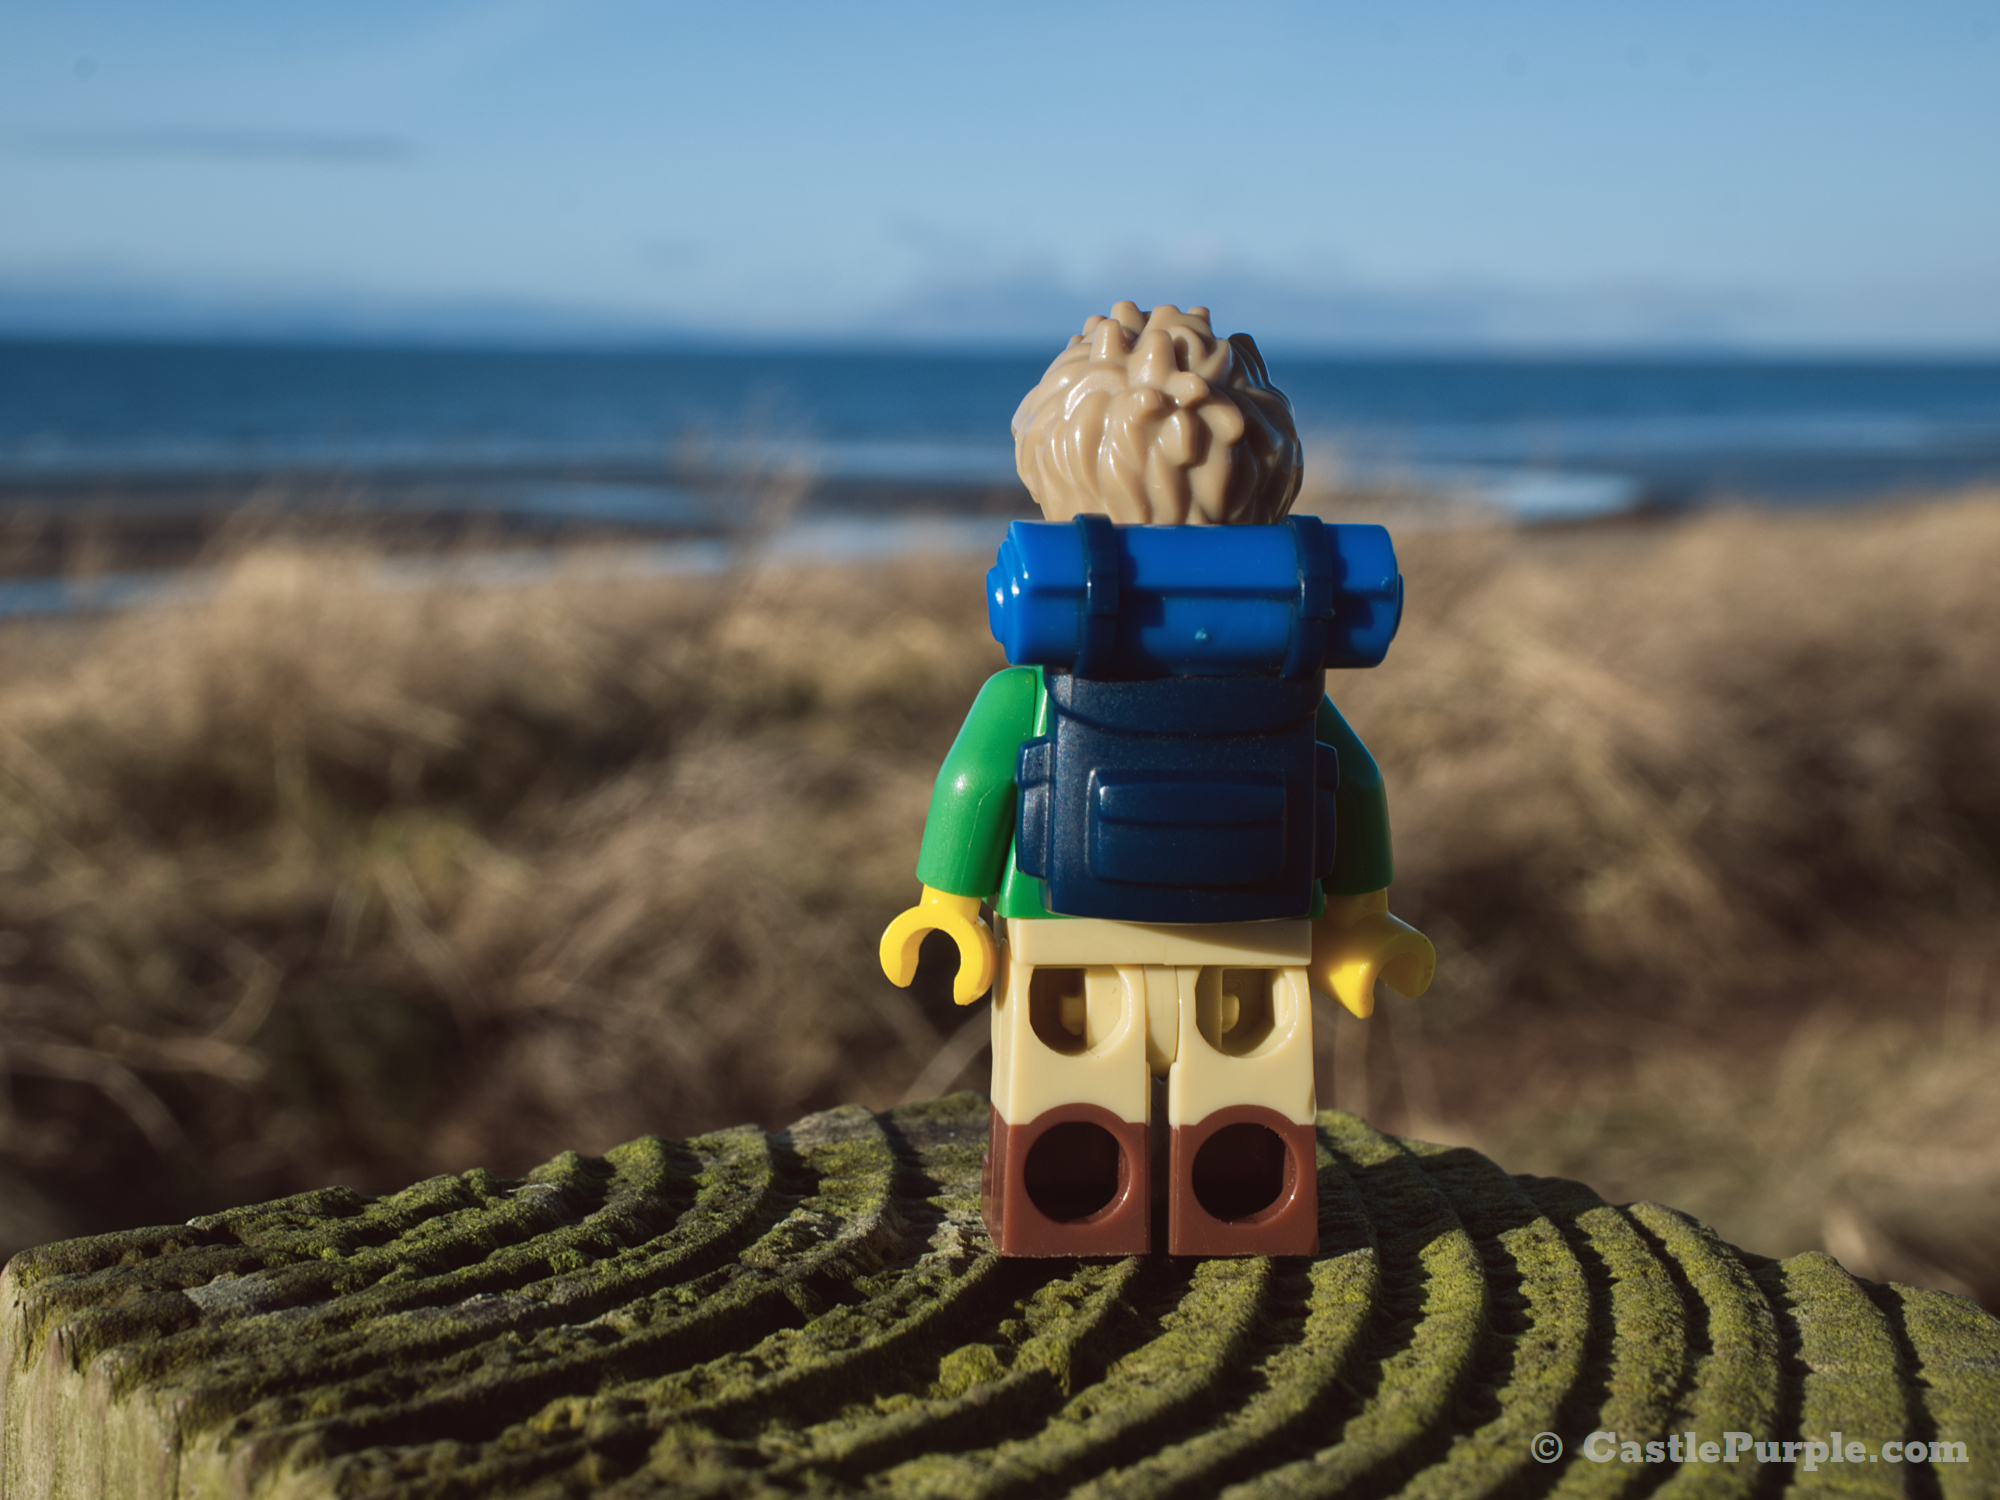 Lego minifigure, standing on top of a wooden post, admires the view over a beach and out to sea.